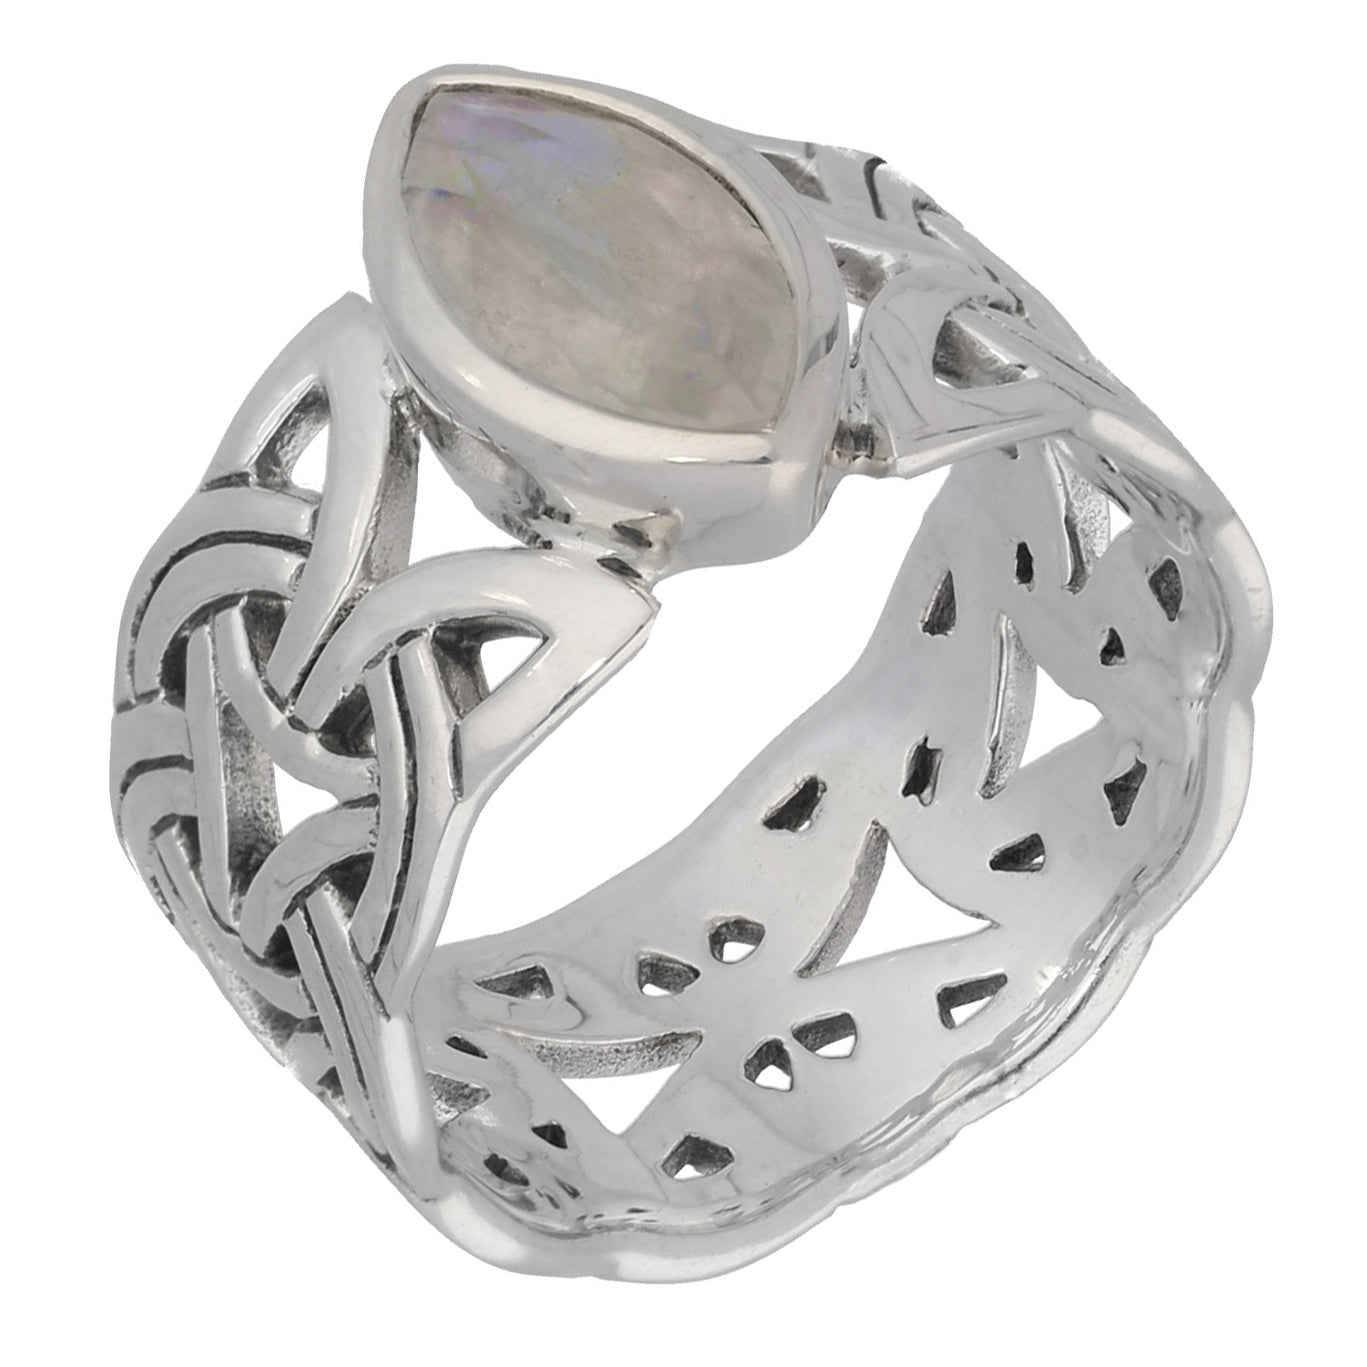 Borre Knot Viking Braided Wedding Band Ring in Sterling Silver with Marquise Gemstone